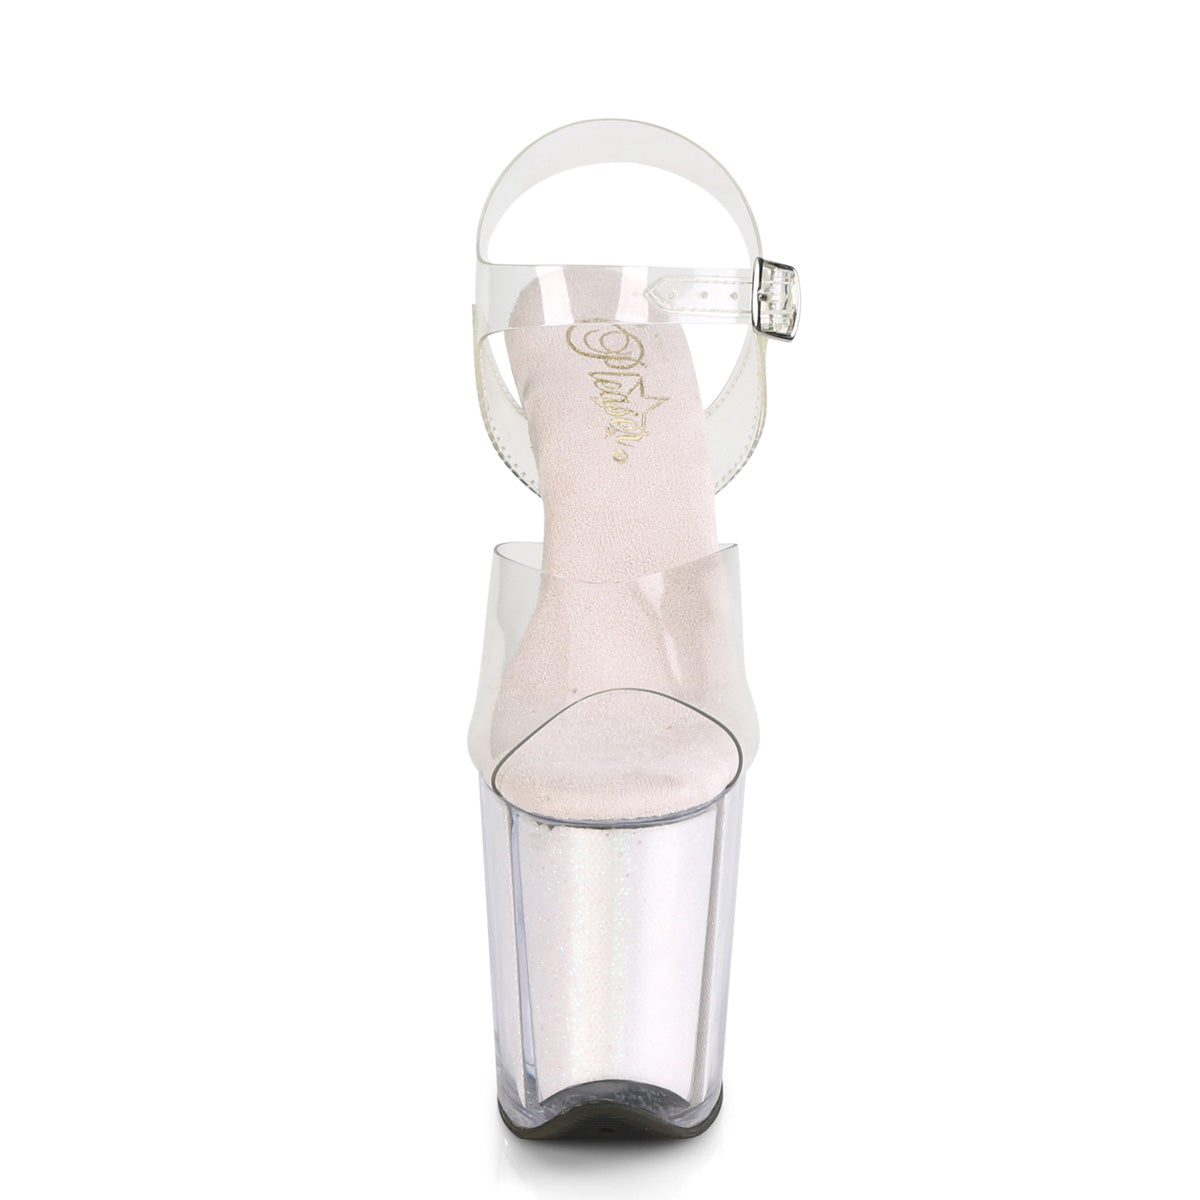 FLAMINGO-808G Pleaser Clear/Opal Glitter Inserts Platform Shoes [Exotic Dancing Shoes]